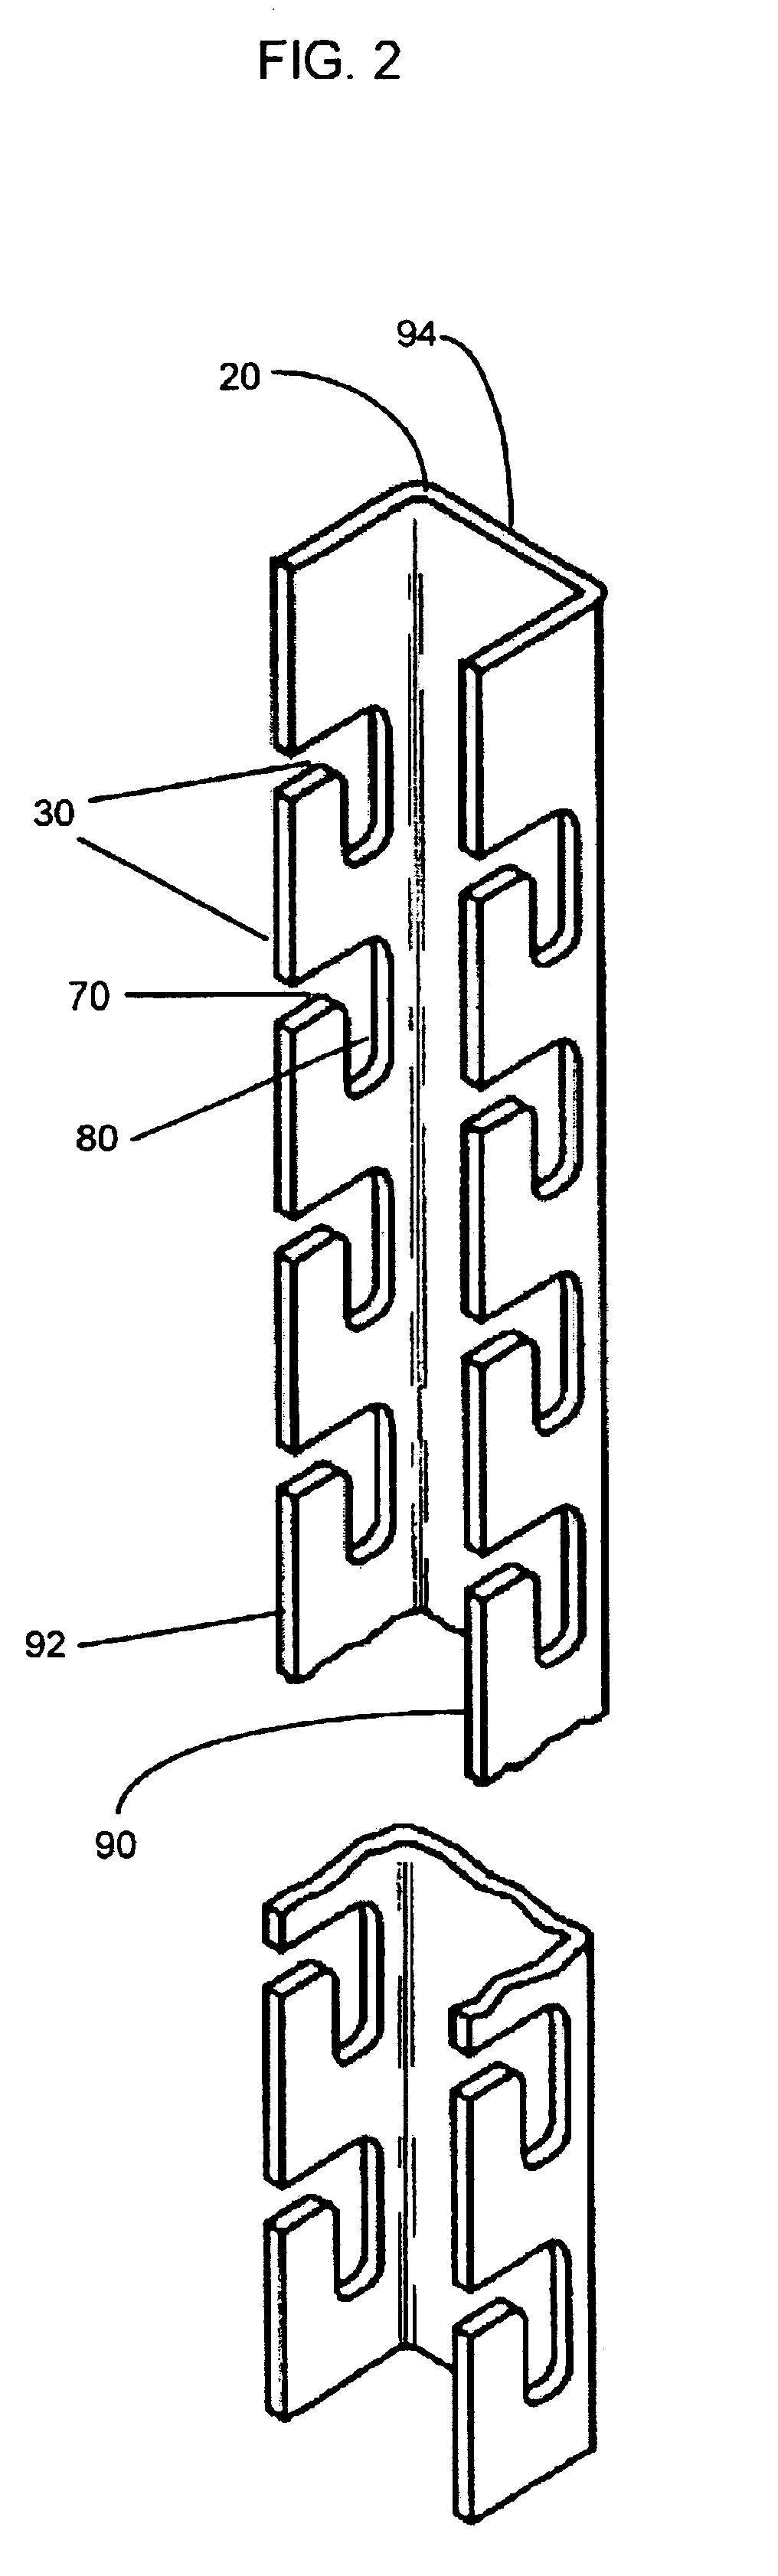 Method and apparatus for a wire shelf hooking onto slotted brackets